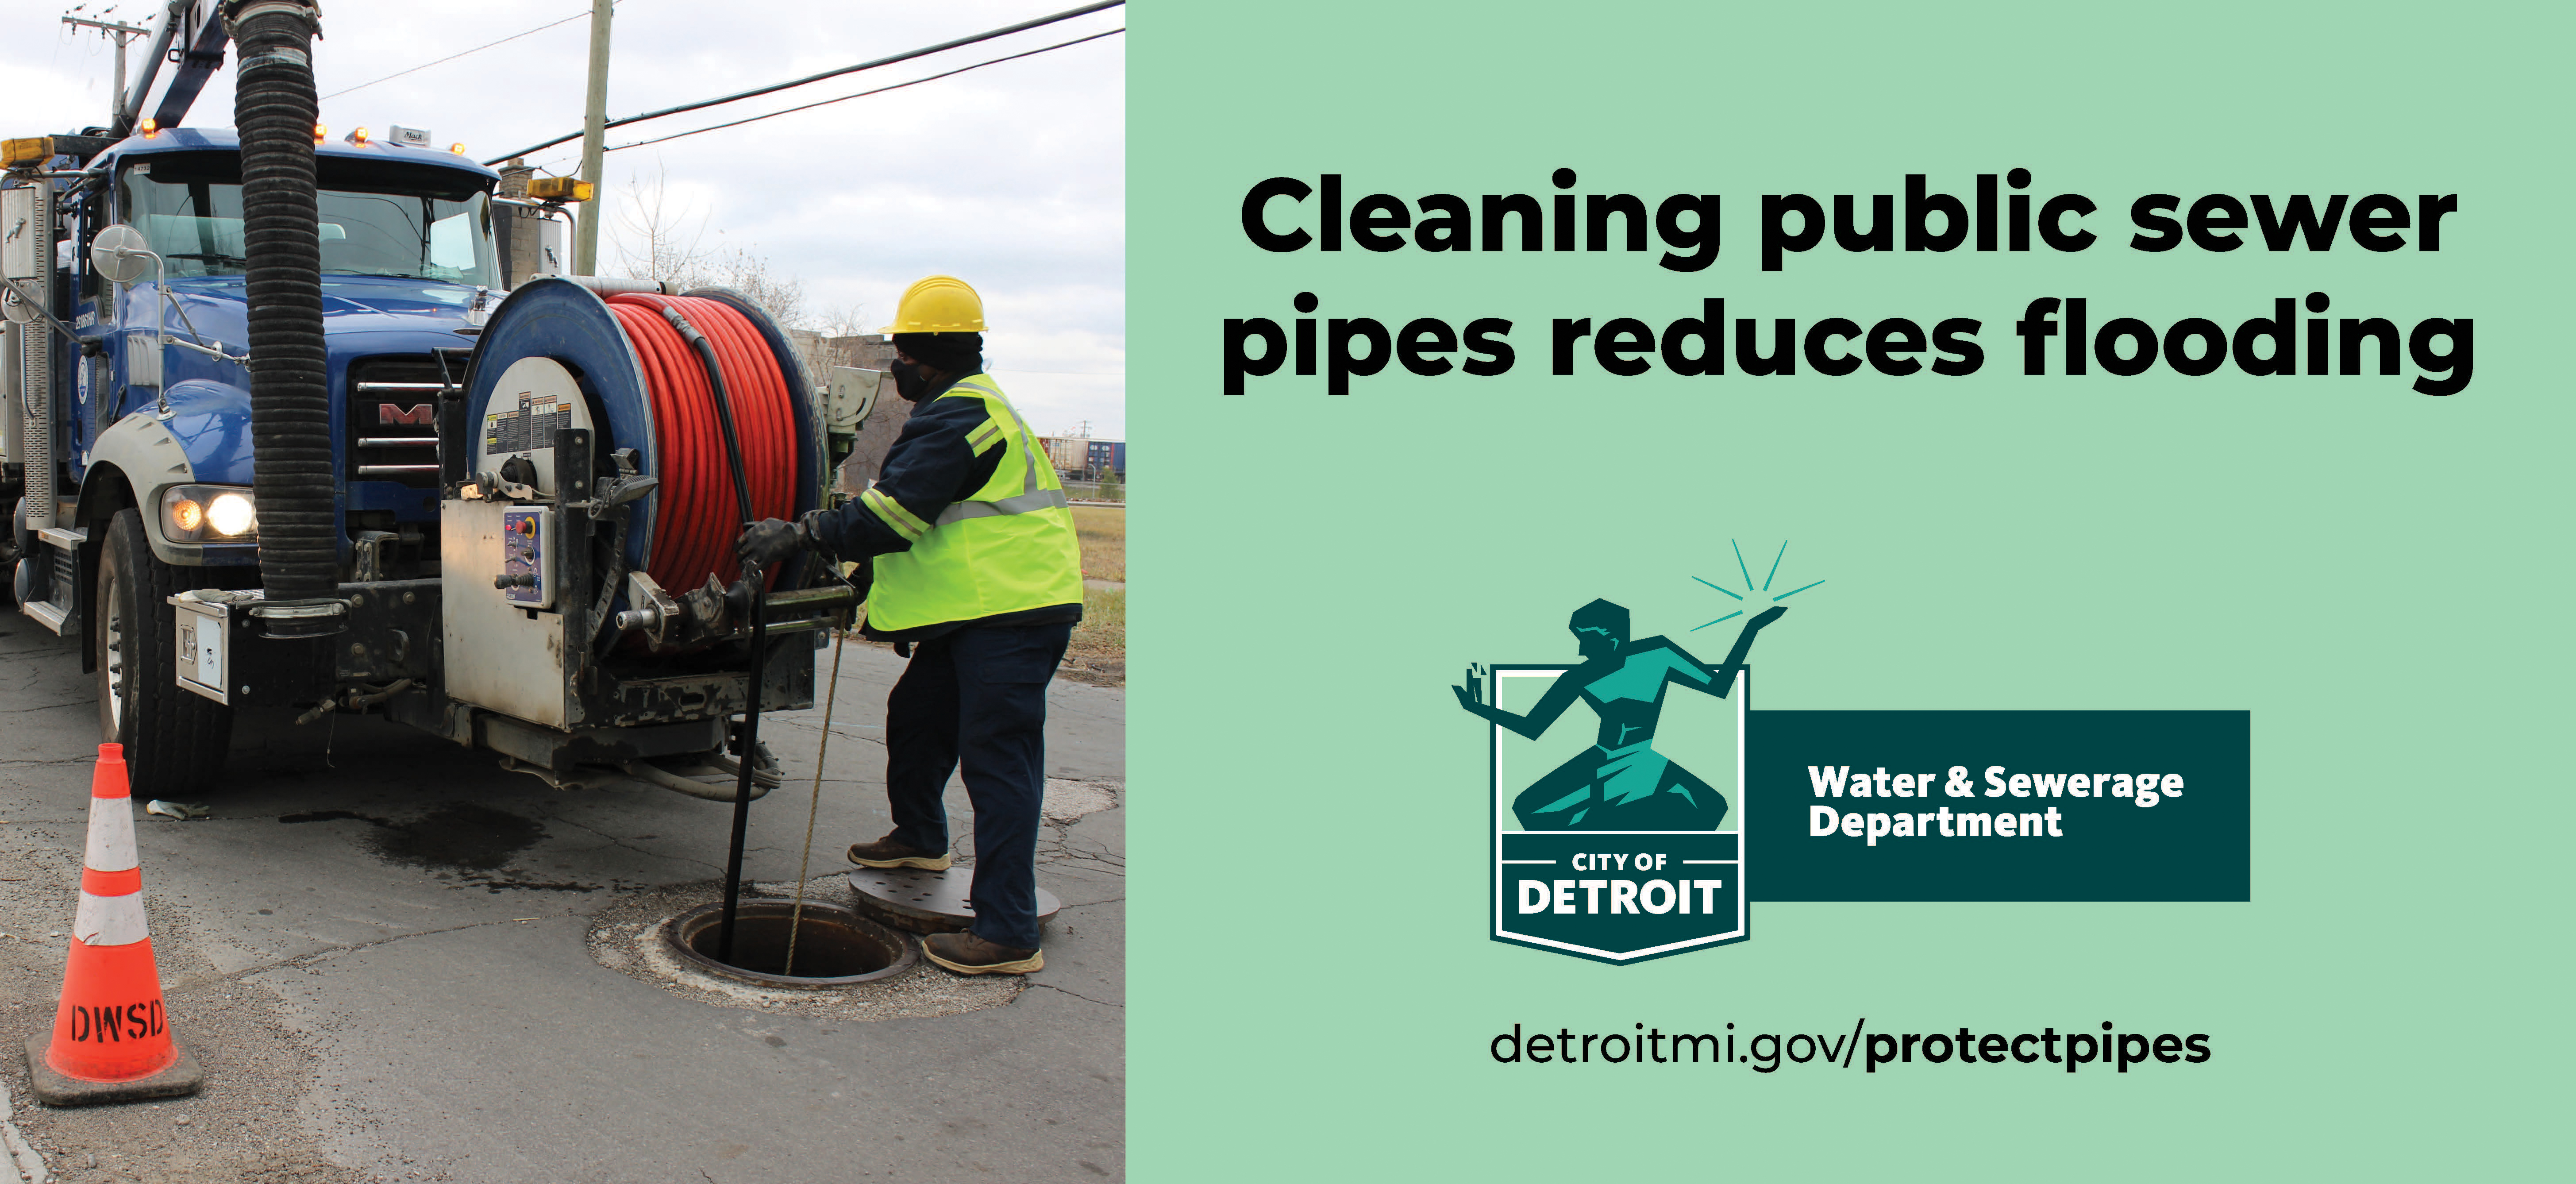 Cleaning Public Sewer Pipes Reduce Flooding